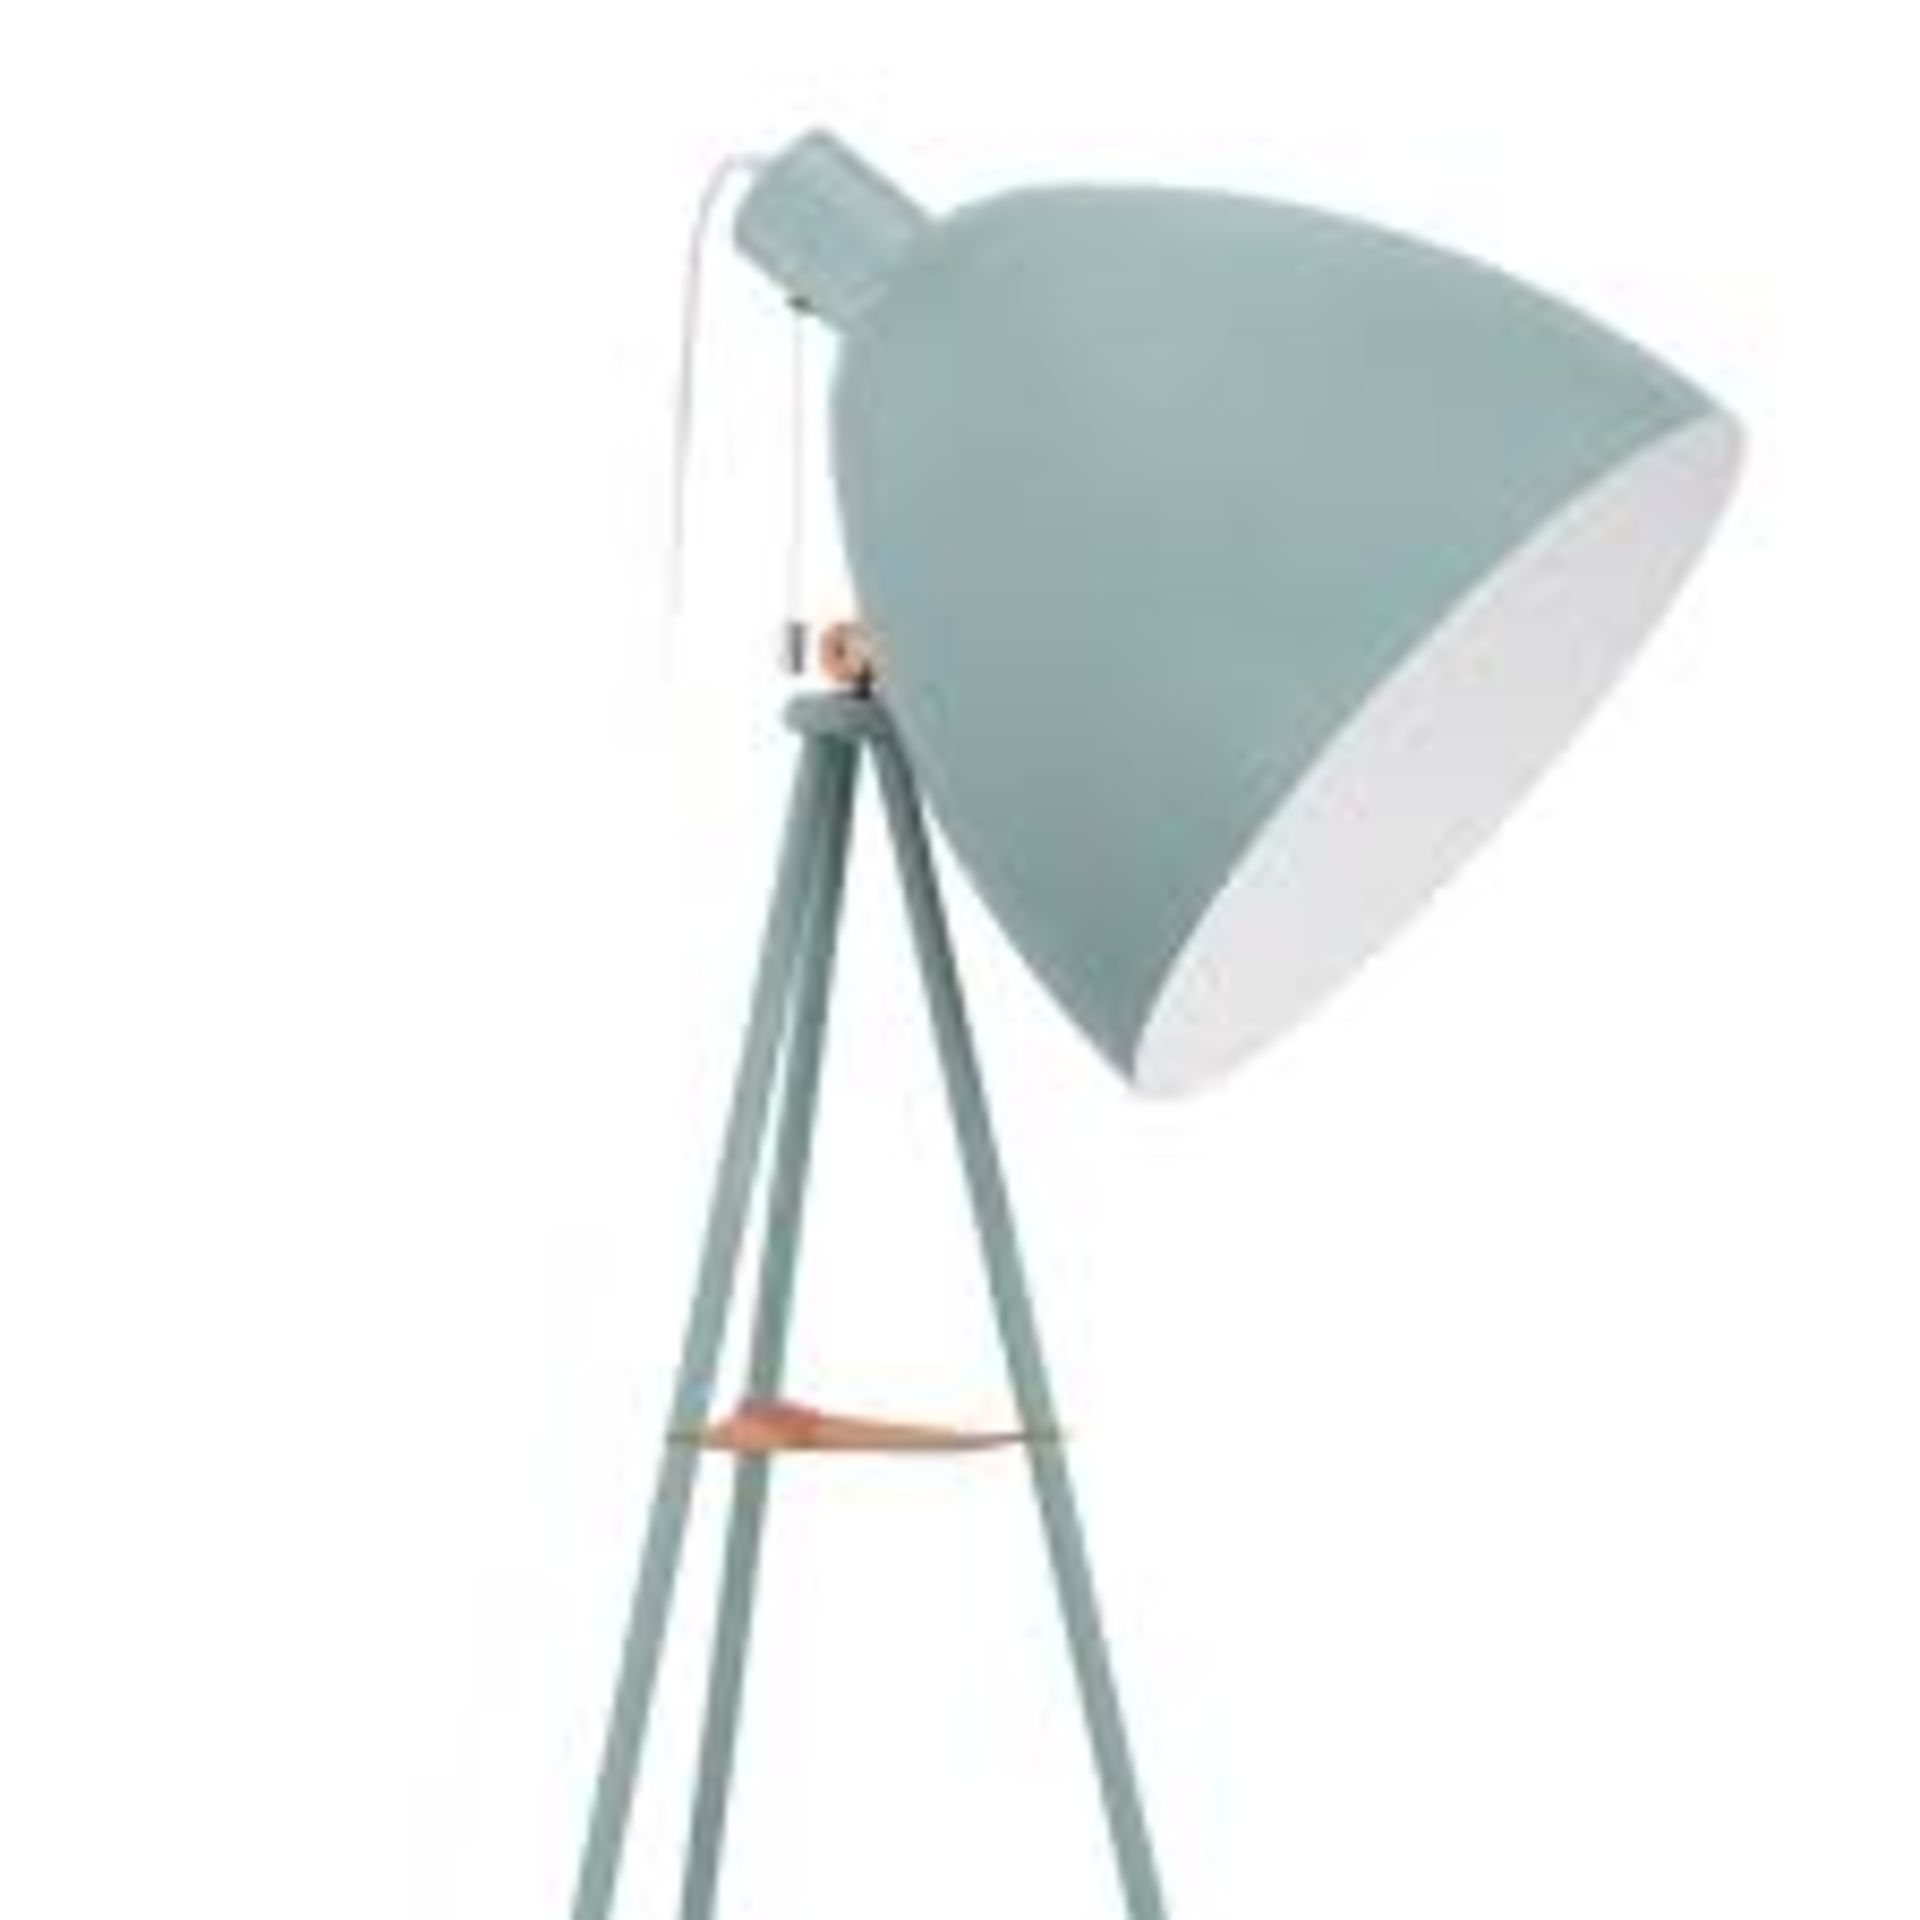 Boxed Linsenburg 135.5cm Floor Lamp In Mint Green RRP £70 (16484) (Shade Only) (Public Viewing and